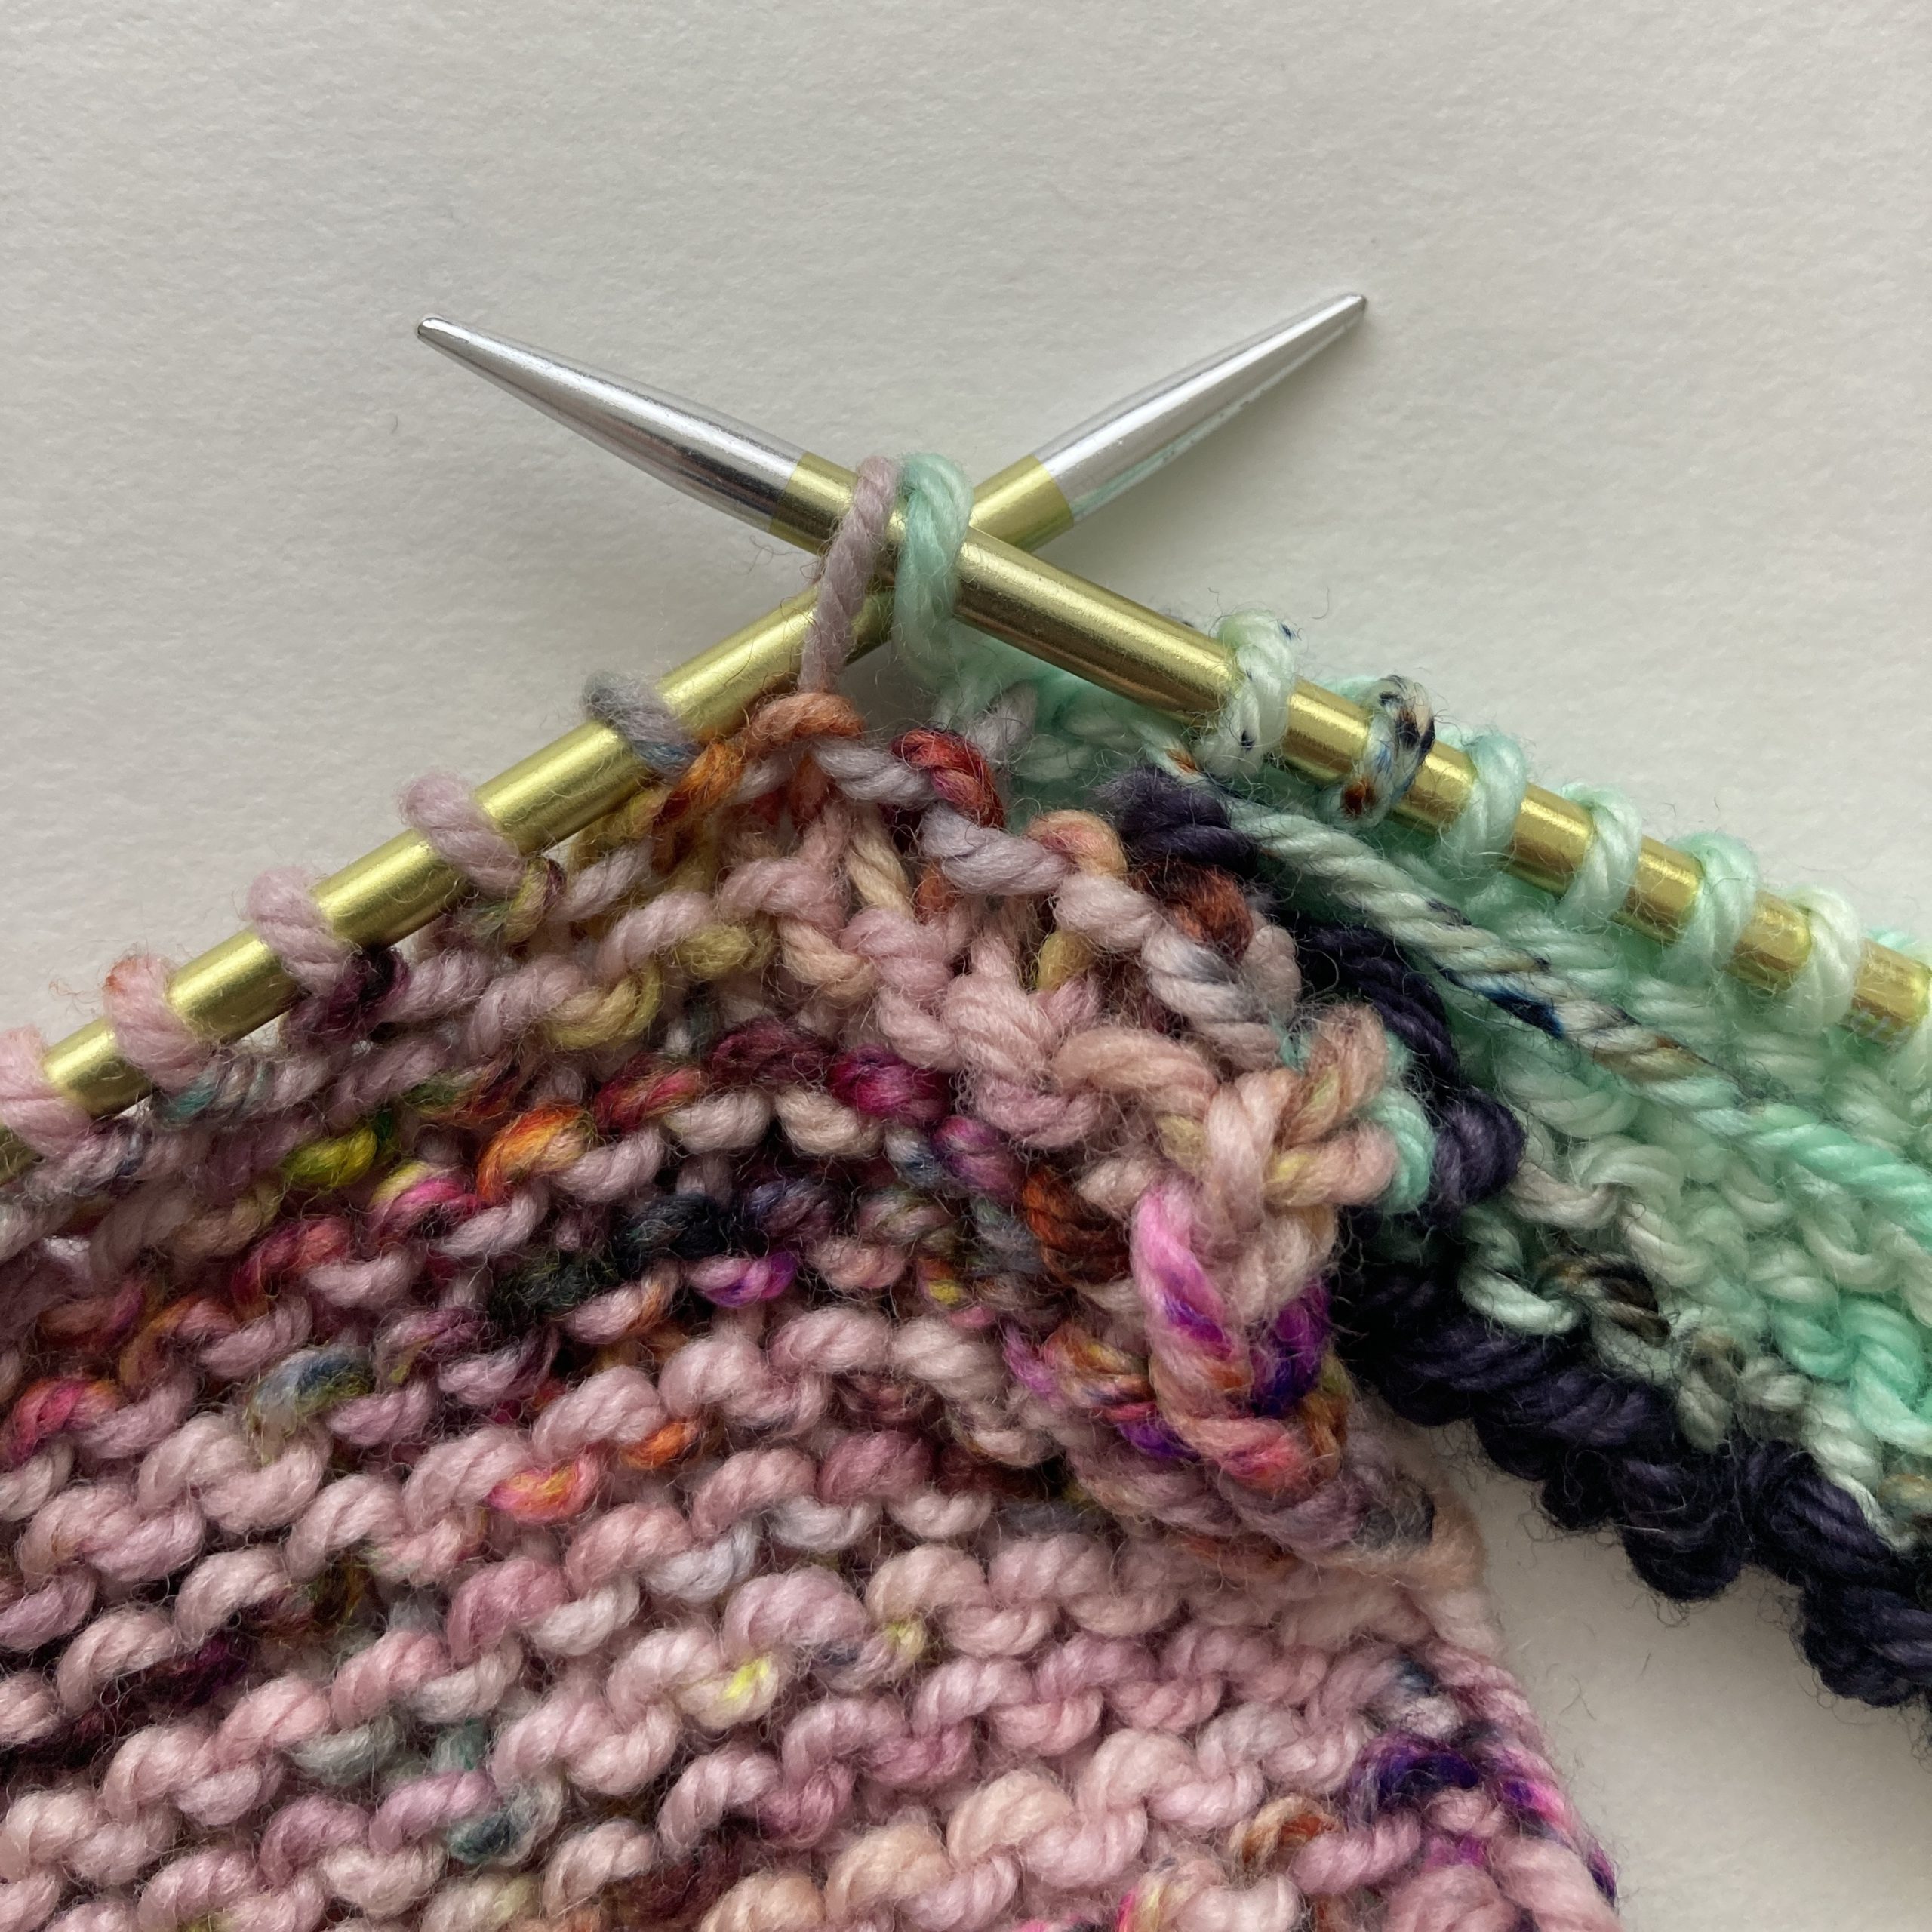 (RS) at end of row. SL1WYIF from last stitch (green) on needle, then SL1WYIF from live stitches to be joined (pink).